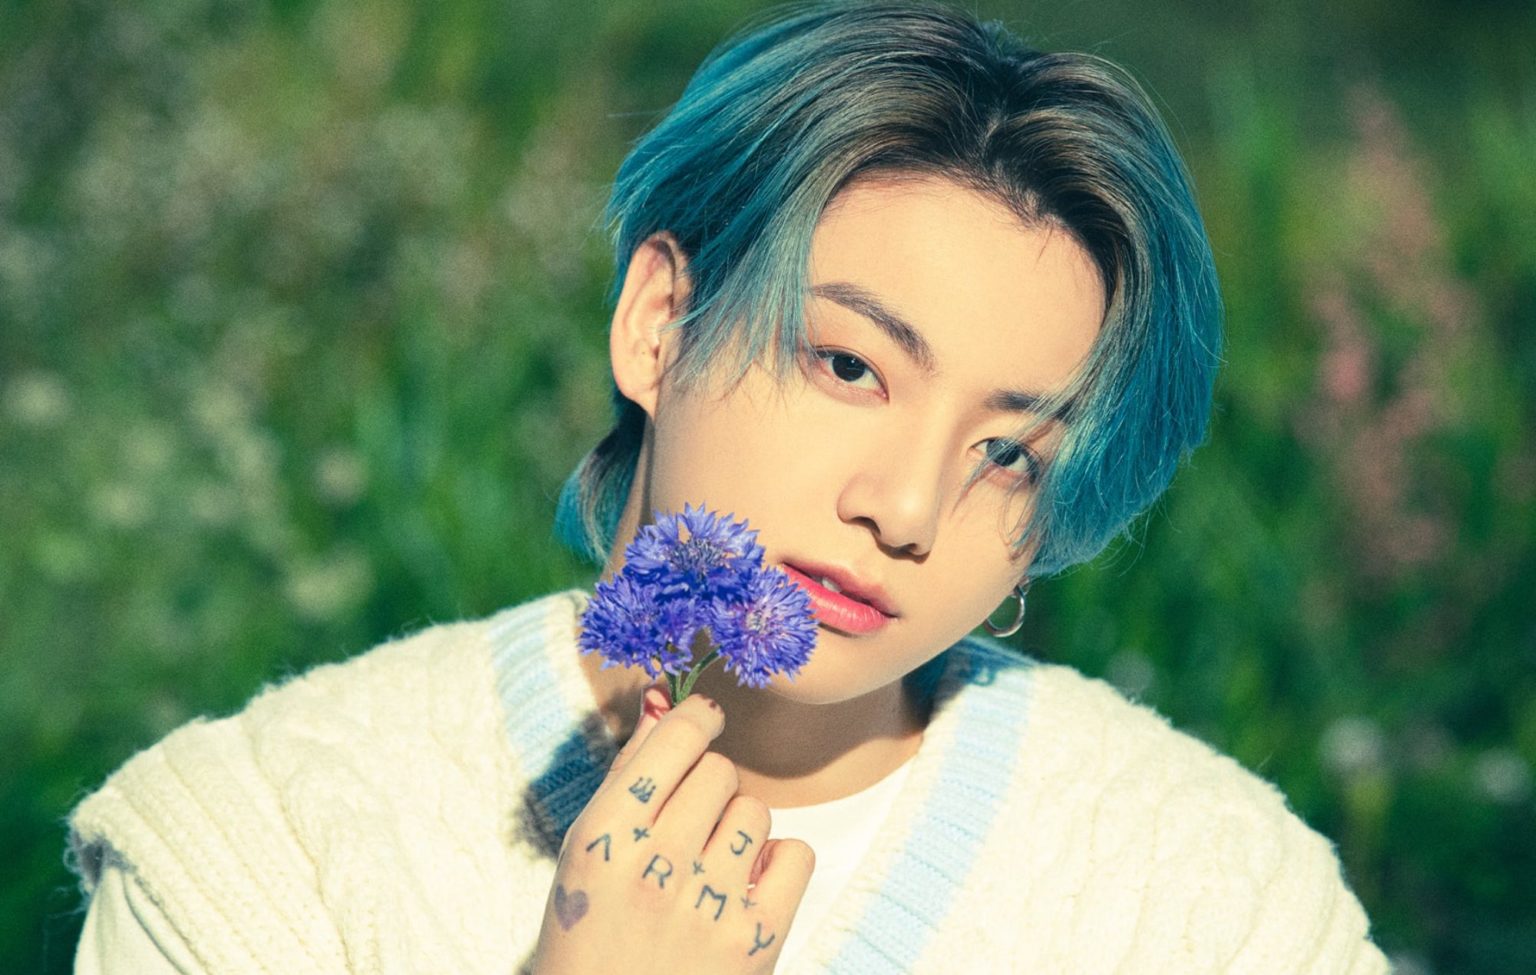 Jungkook's Blue Hair in "Save Me" Music Video Leaves Fans Breathless - wide 10